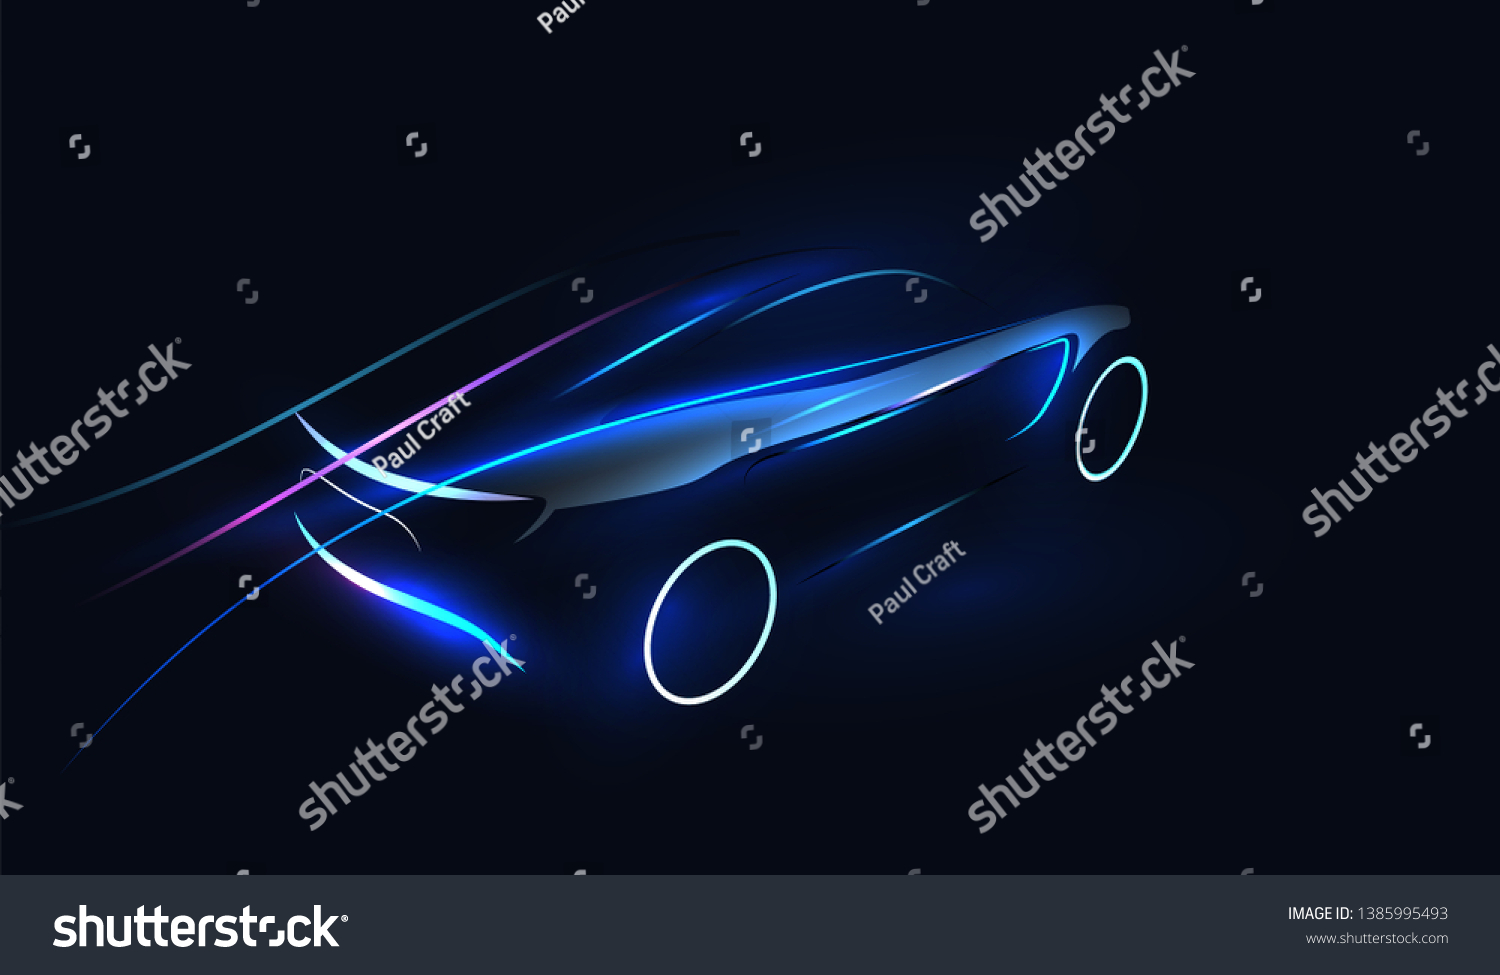 SVG of Abstract Futuristic Neon Glowing Concept Car Silhouette. Automotive template for your banner, wallpaper, marketing advertising. Vector illustration. svg